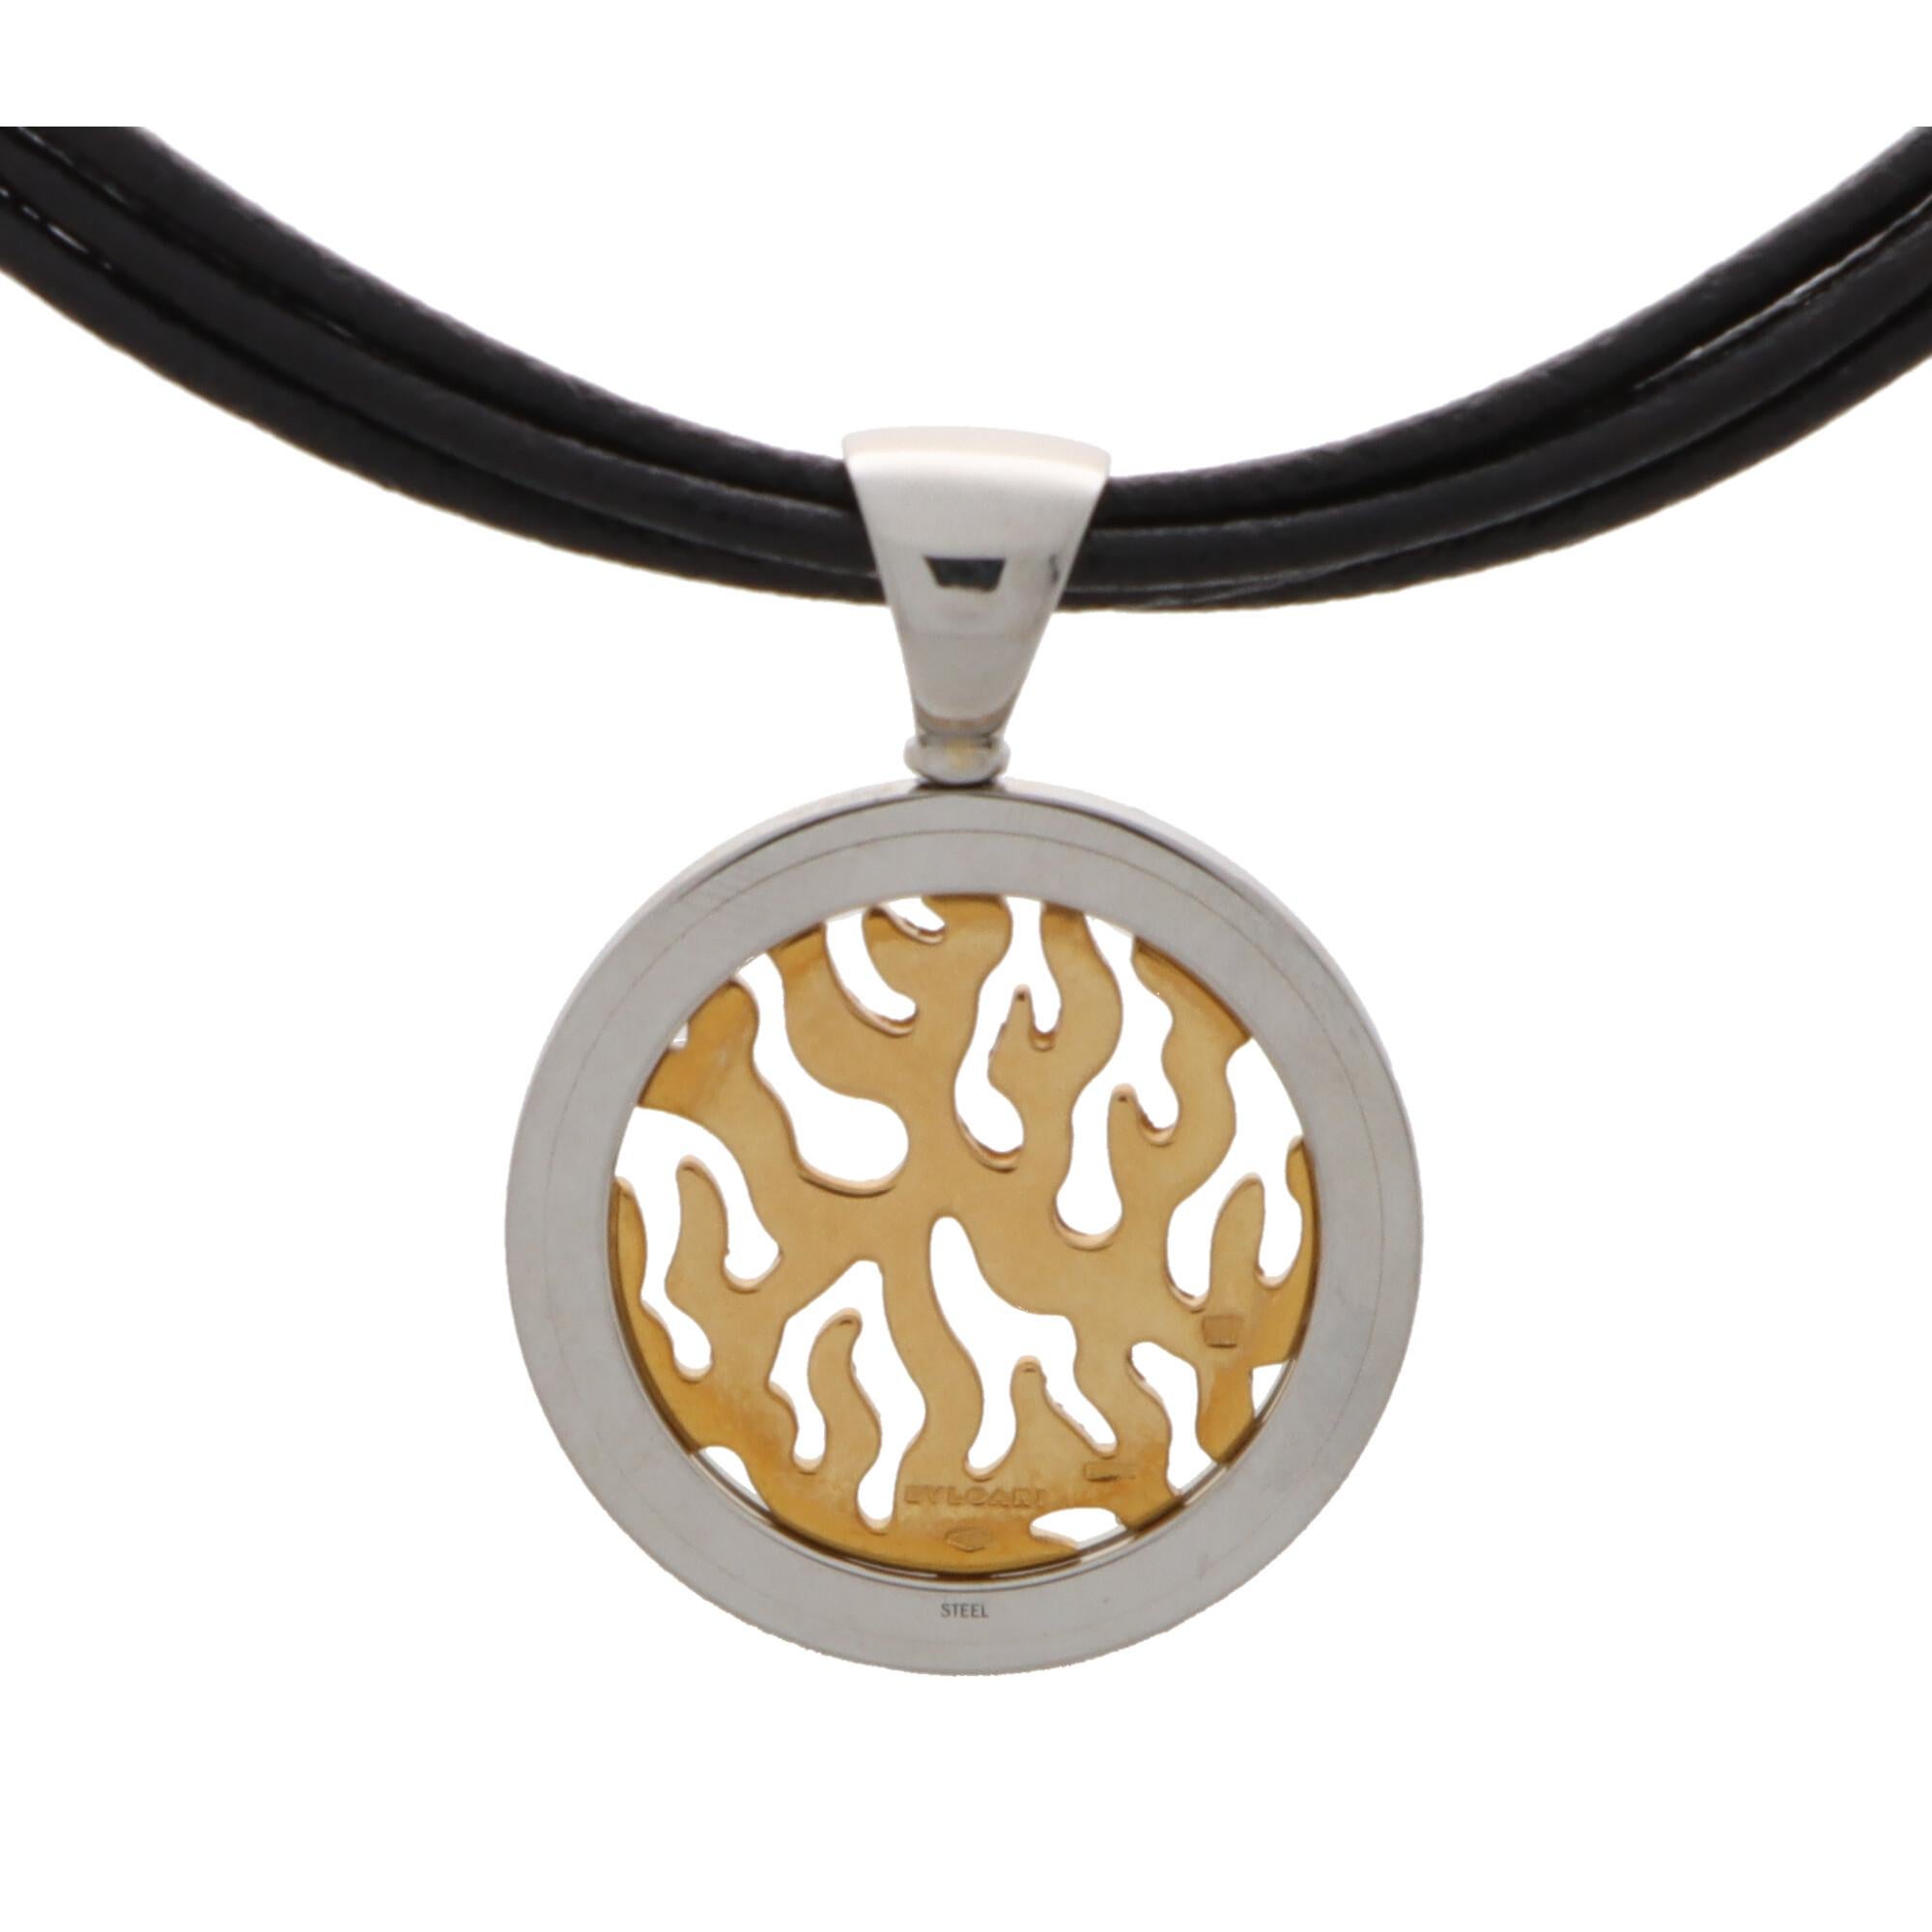 Round Cut Bvlgari Tondo Fire Diamond Pendant in Steel and Yellow Gold with Leather Chain